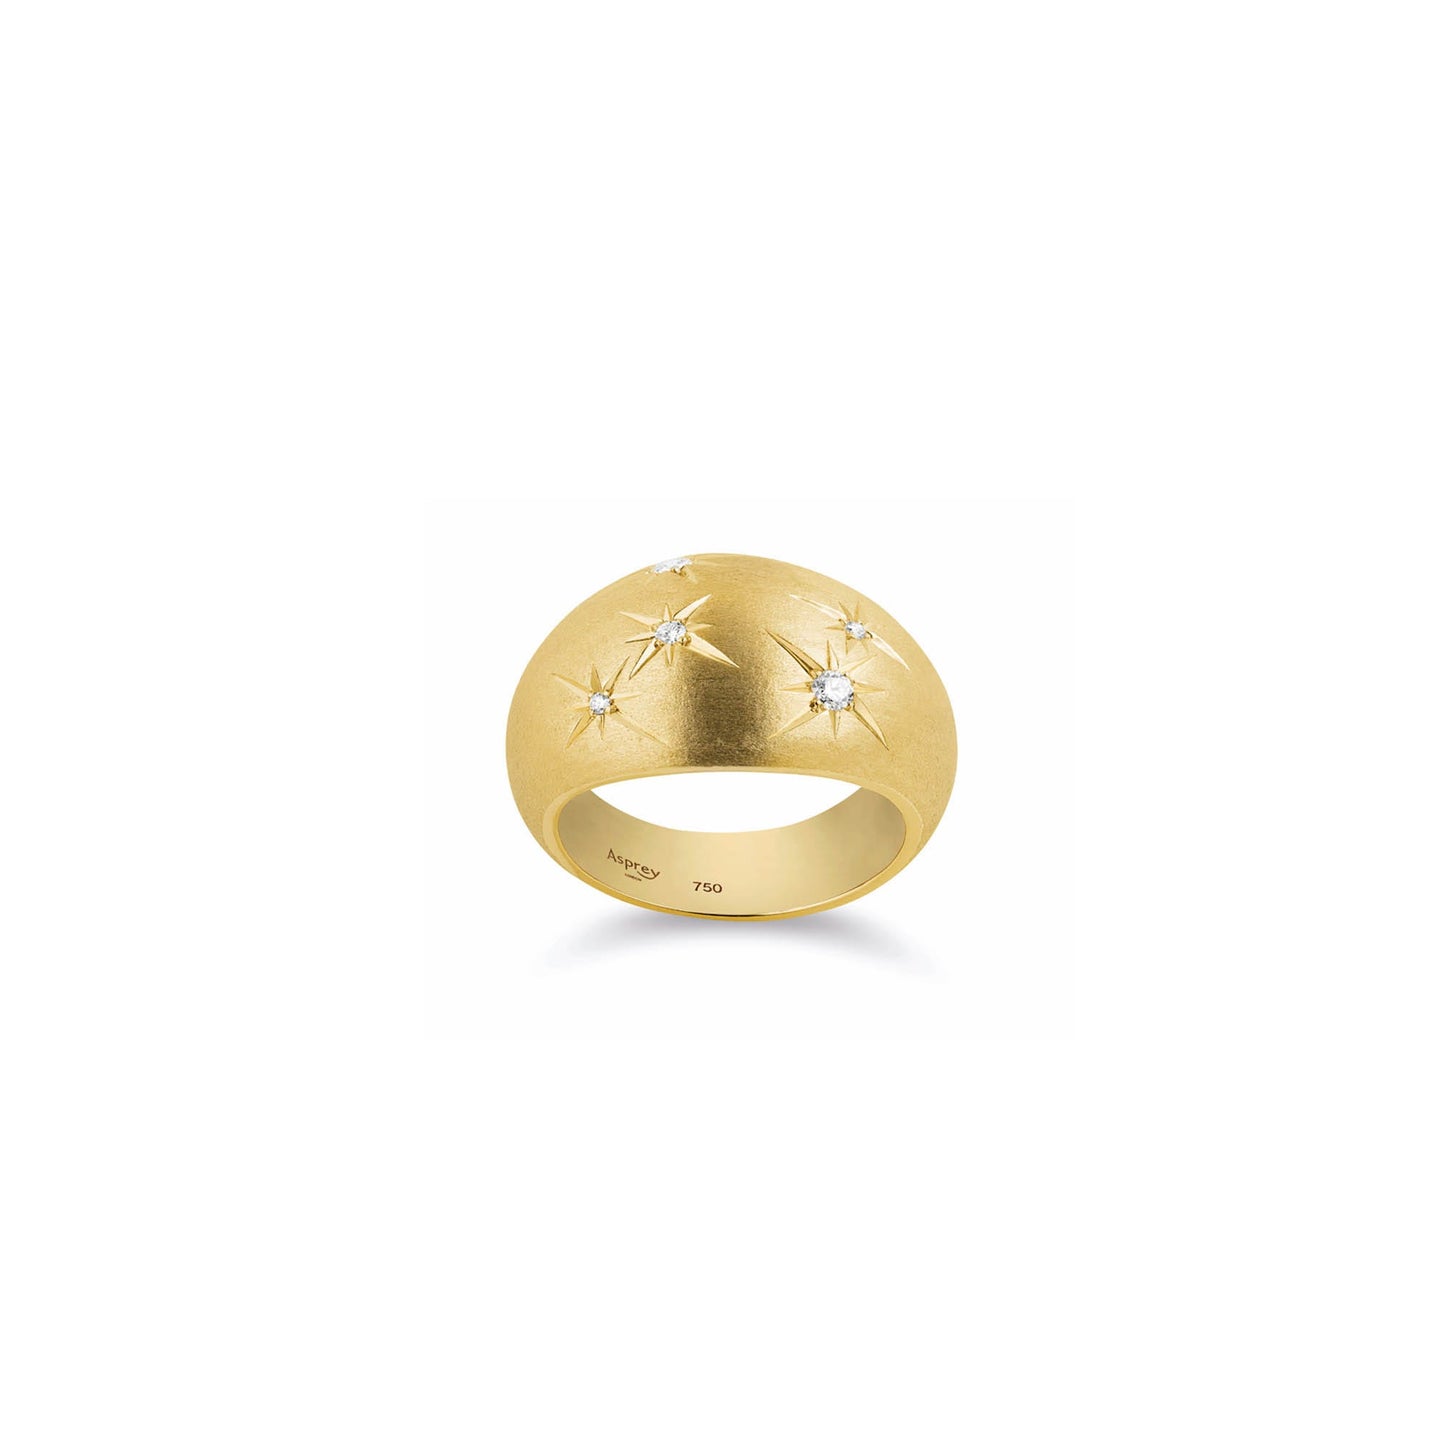 Cosmic Shooting Stars Ring in 18ct Yellow Gold with Diamonds